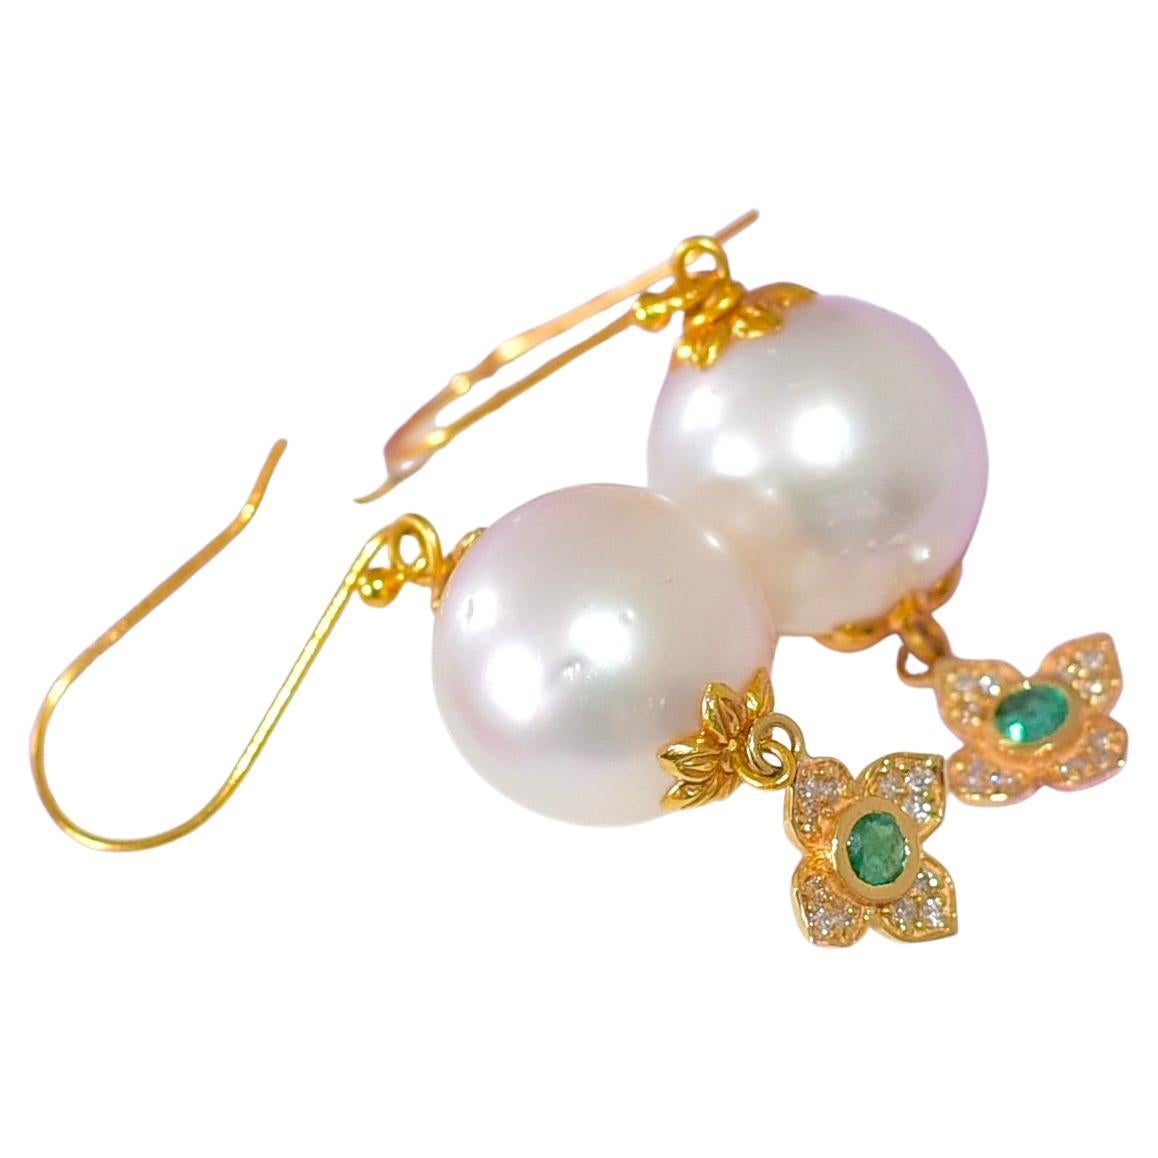 These earrings are real eye-catchers! Long, large South Sea Pearls ( 13.5mm ) and a wonderful flower with a Natural Emerald ​​give the earring a feminine glow.
Pendant:
Genuine 14K GOLD diamond charm pendant with quatrefoil shape design-white